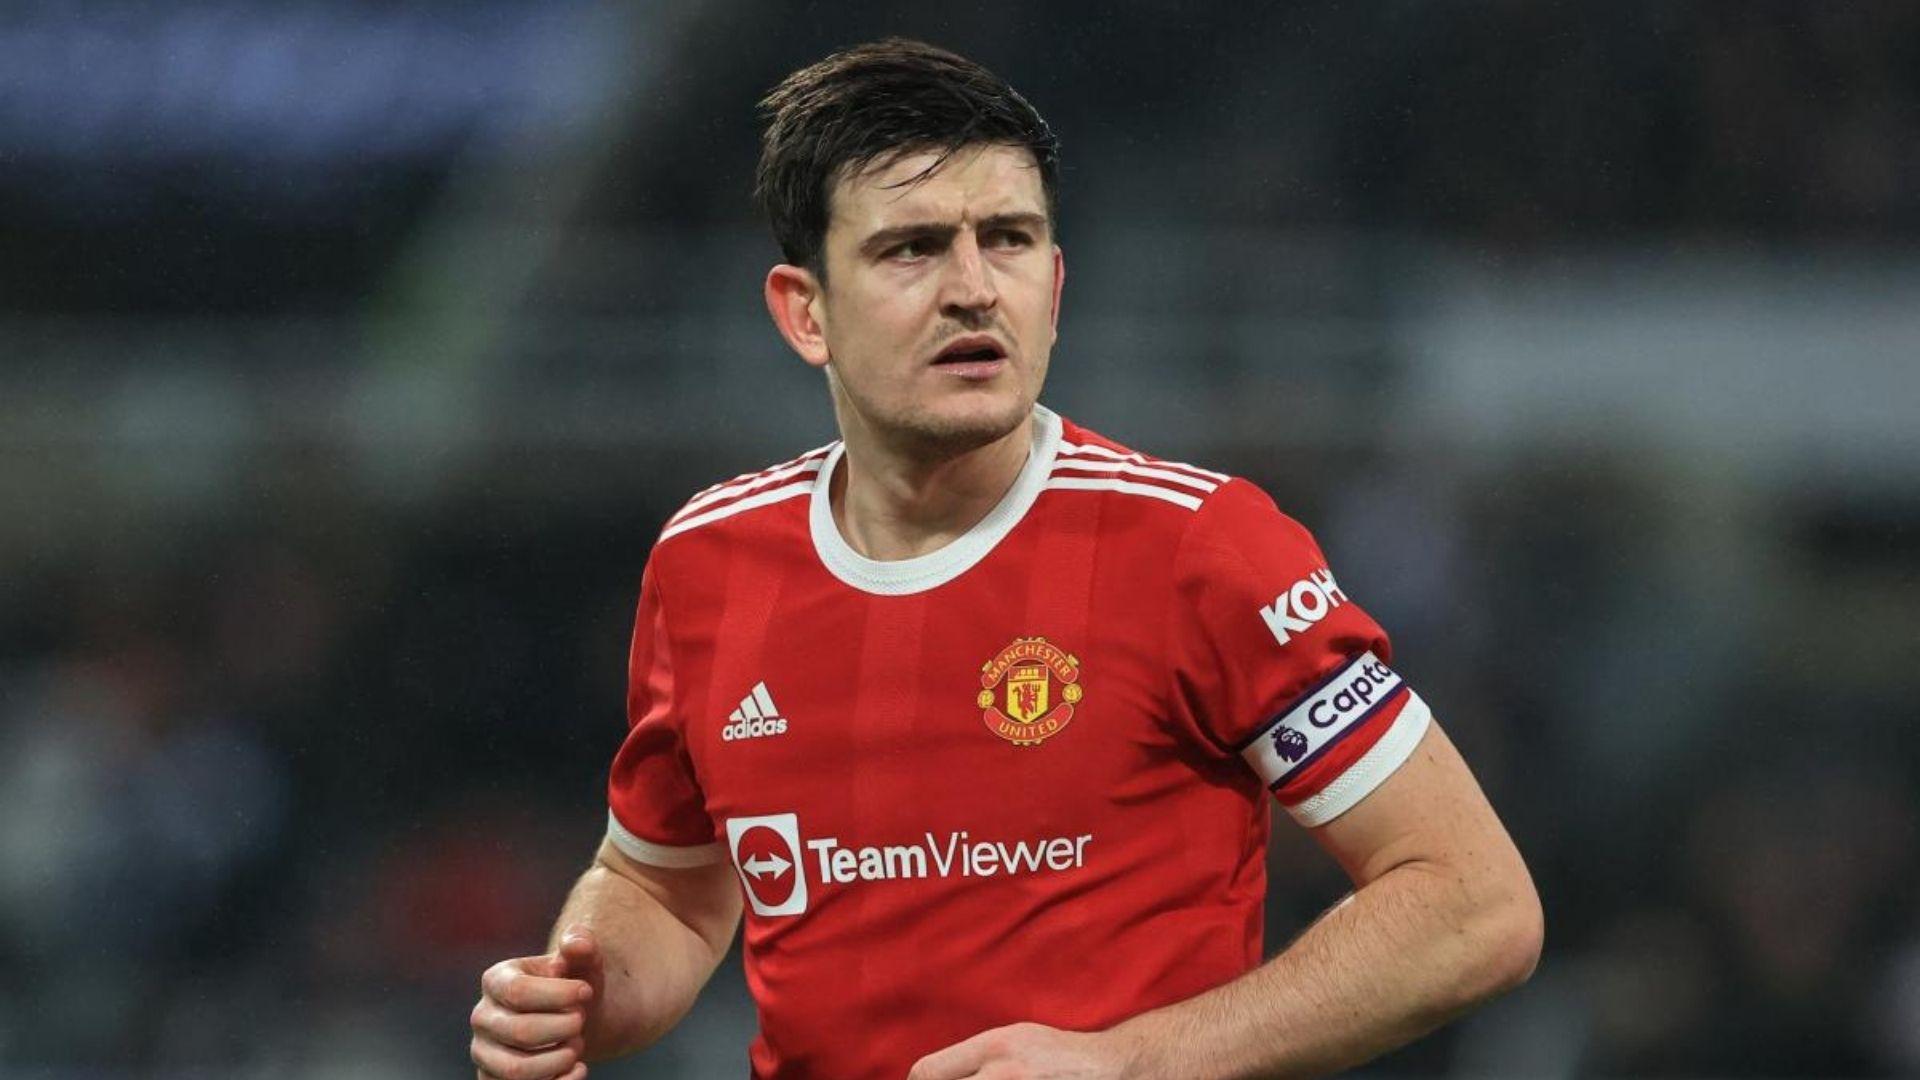 Harry Maguire 3 Manchester United Sedang Berusaha Menjual Harry Maguire